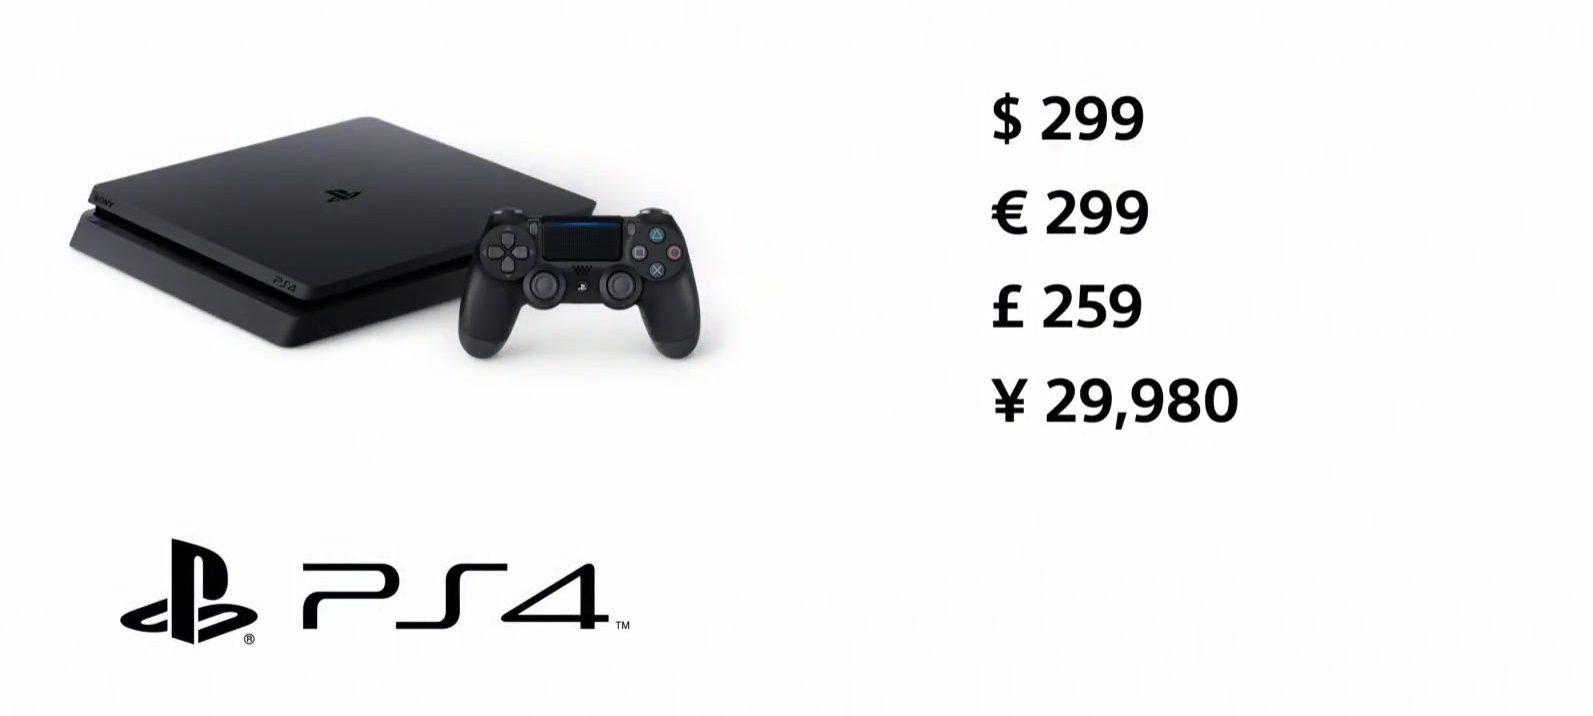 4 malaysia playstation price How Much